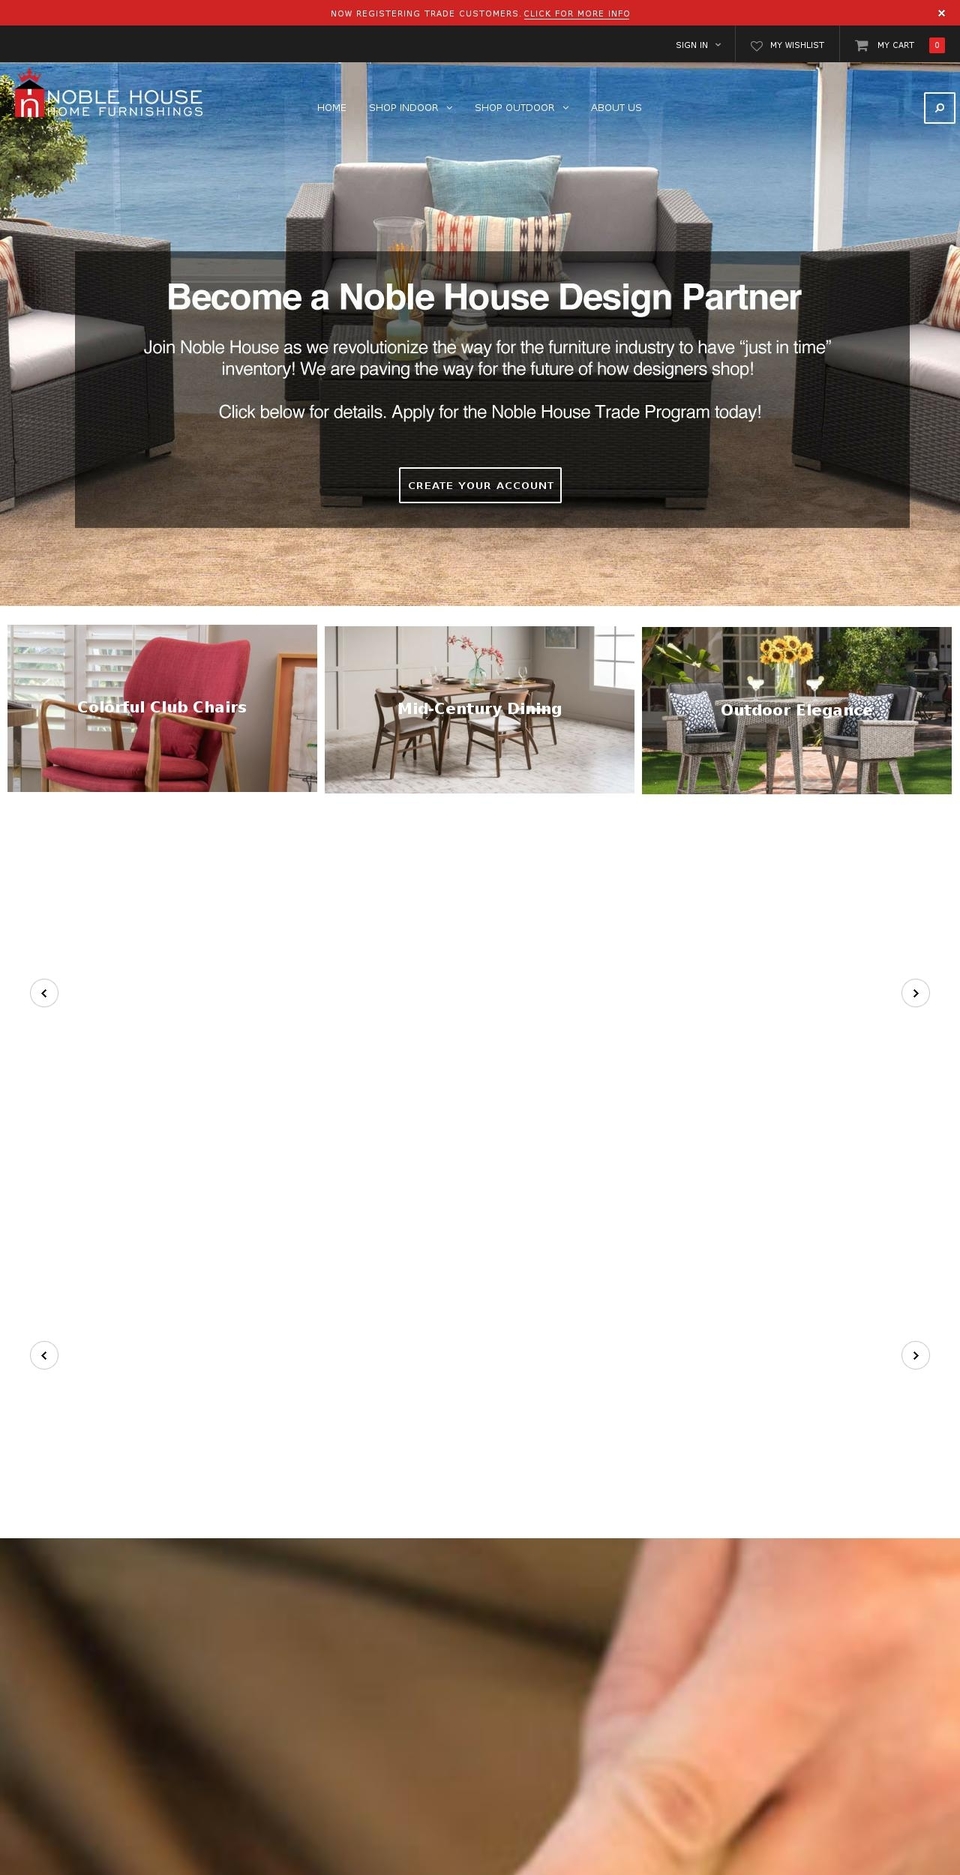 Main Live Theme - Github Connected Shopify theme site example noblehousefurniture.com